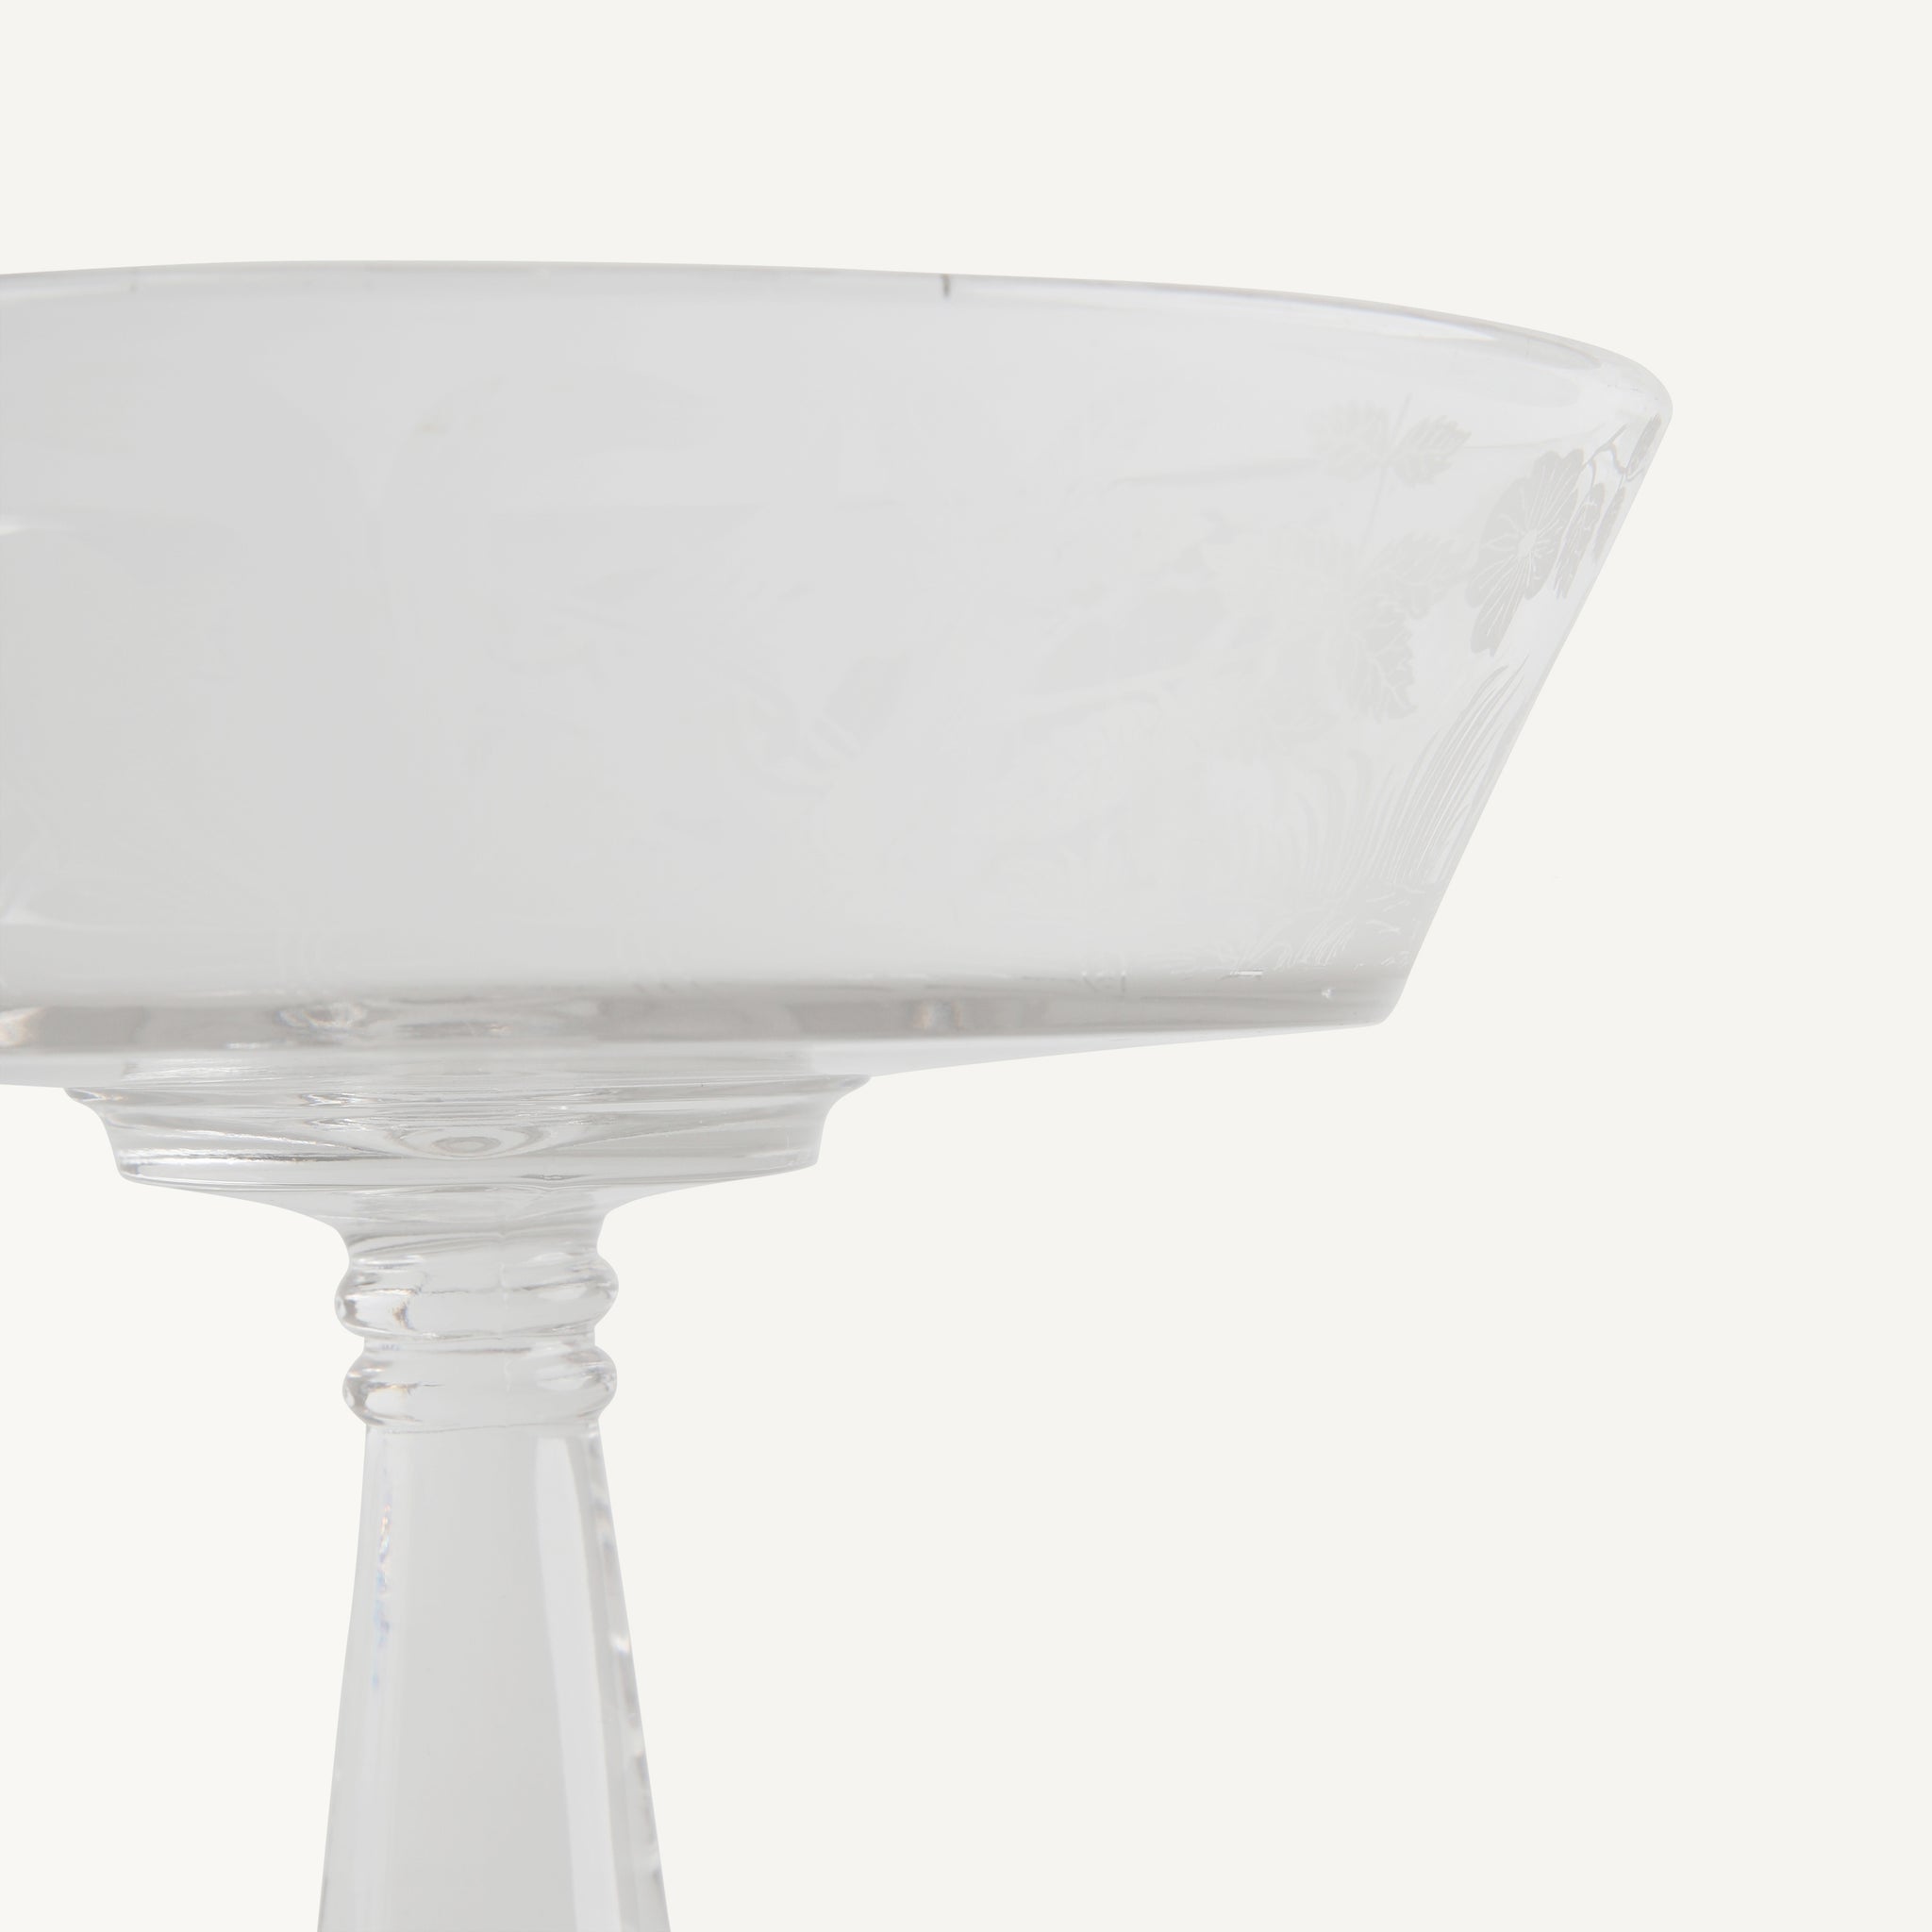 ANTIQUE FROSTED GLASS COMPOTE